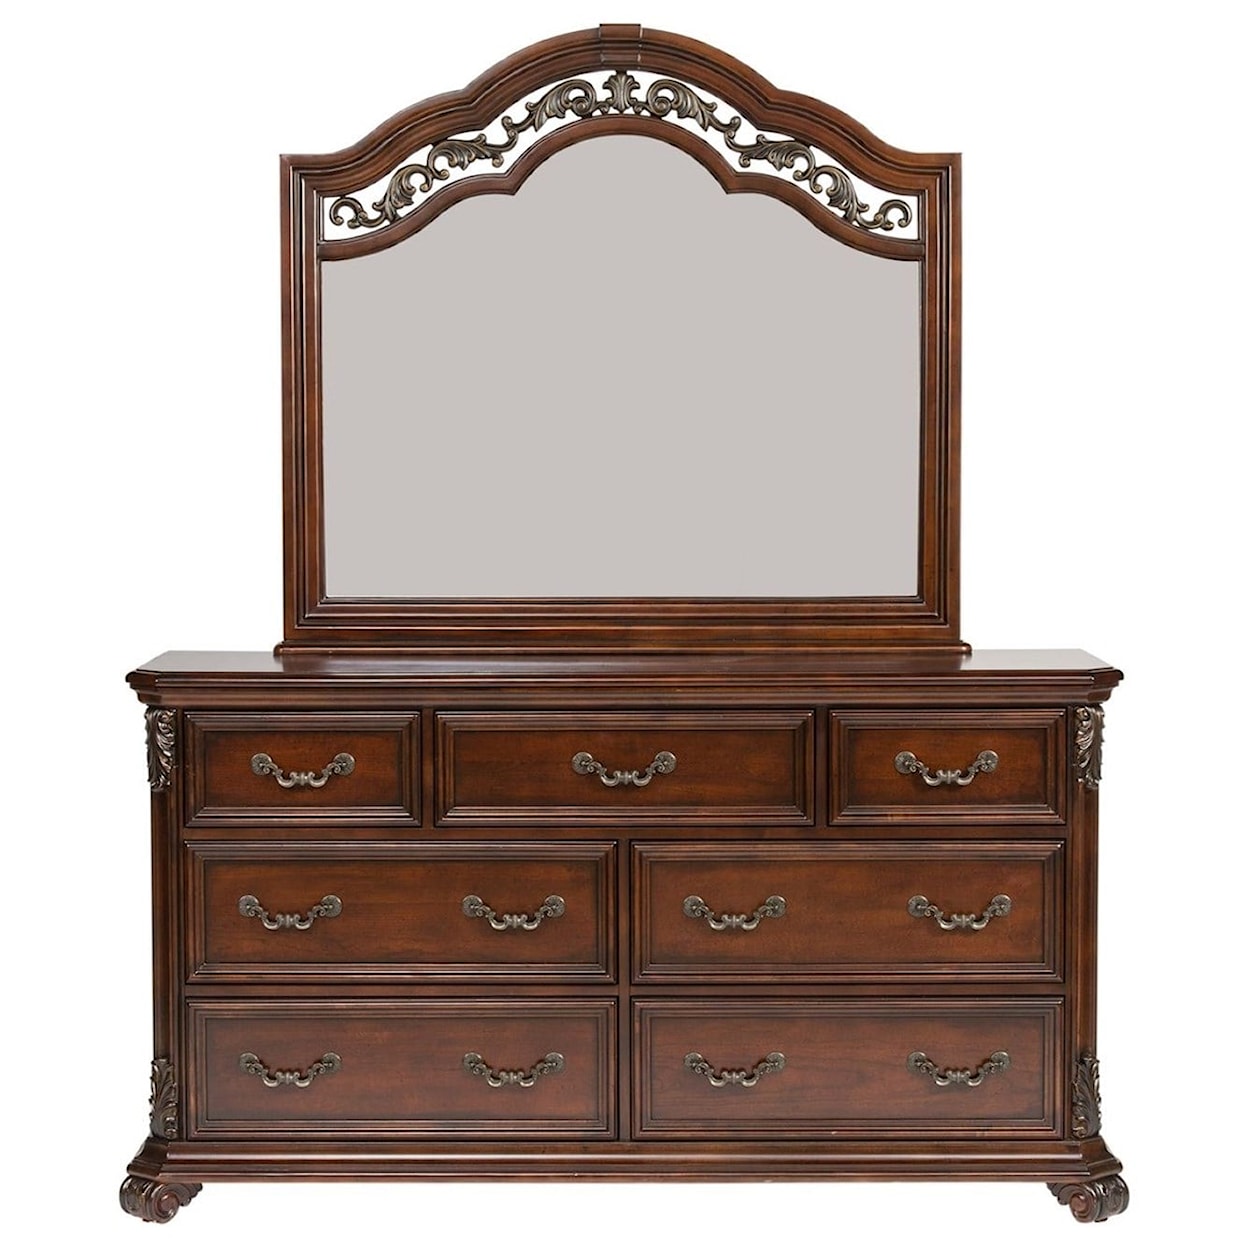 Libby Lenor Arched Dresser Mirror